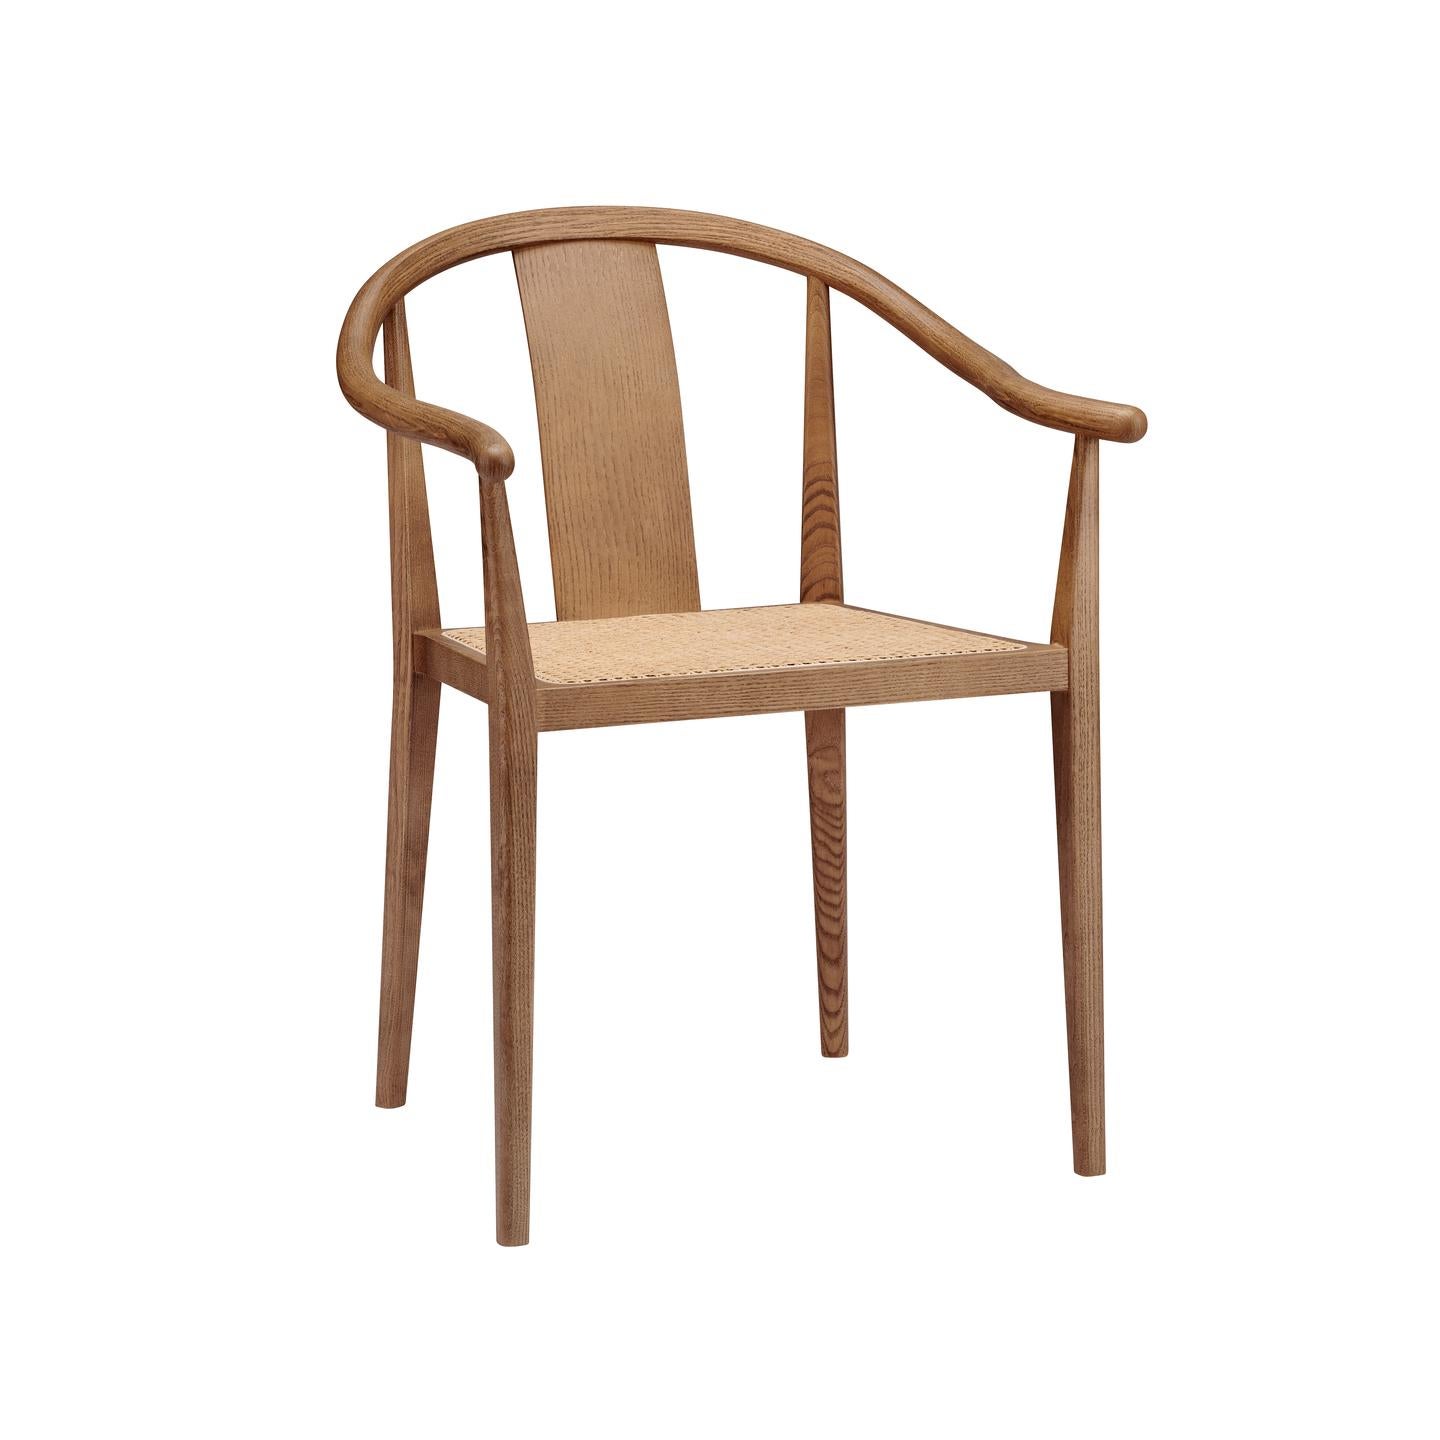 'Shanghai' Chair by Norr11, Light Smoked Oak, Natural Rattan For Sale 7